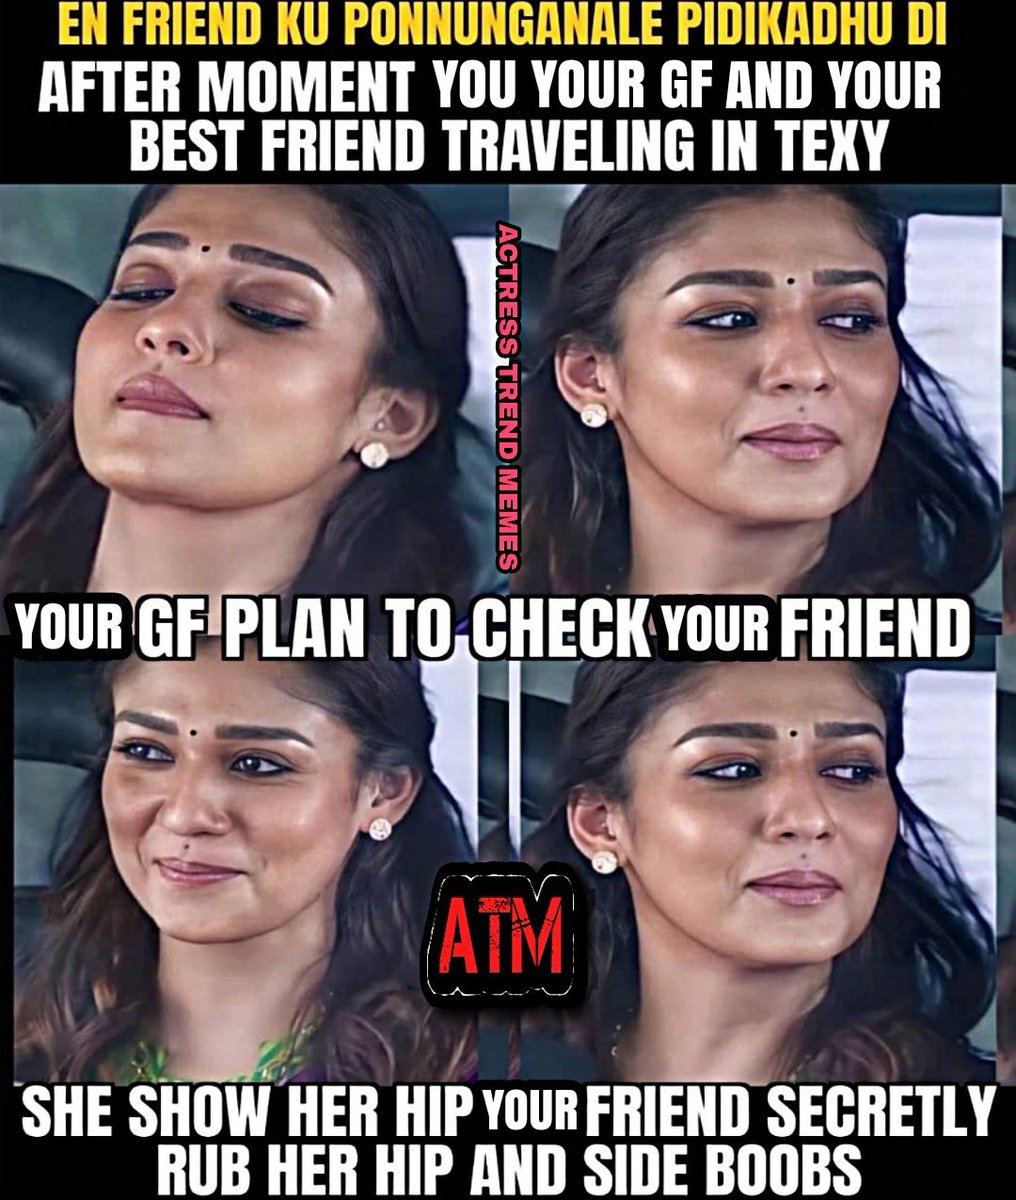 Nowadays Innocent BF's Untold Sad Story BeLike That Avs@riS For You..... #ATM #ActressTrendMemes